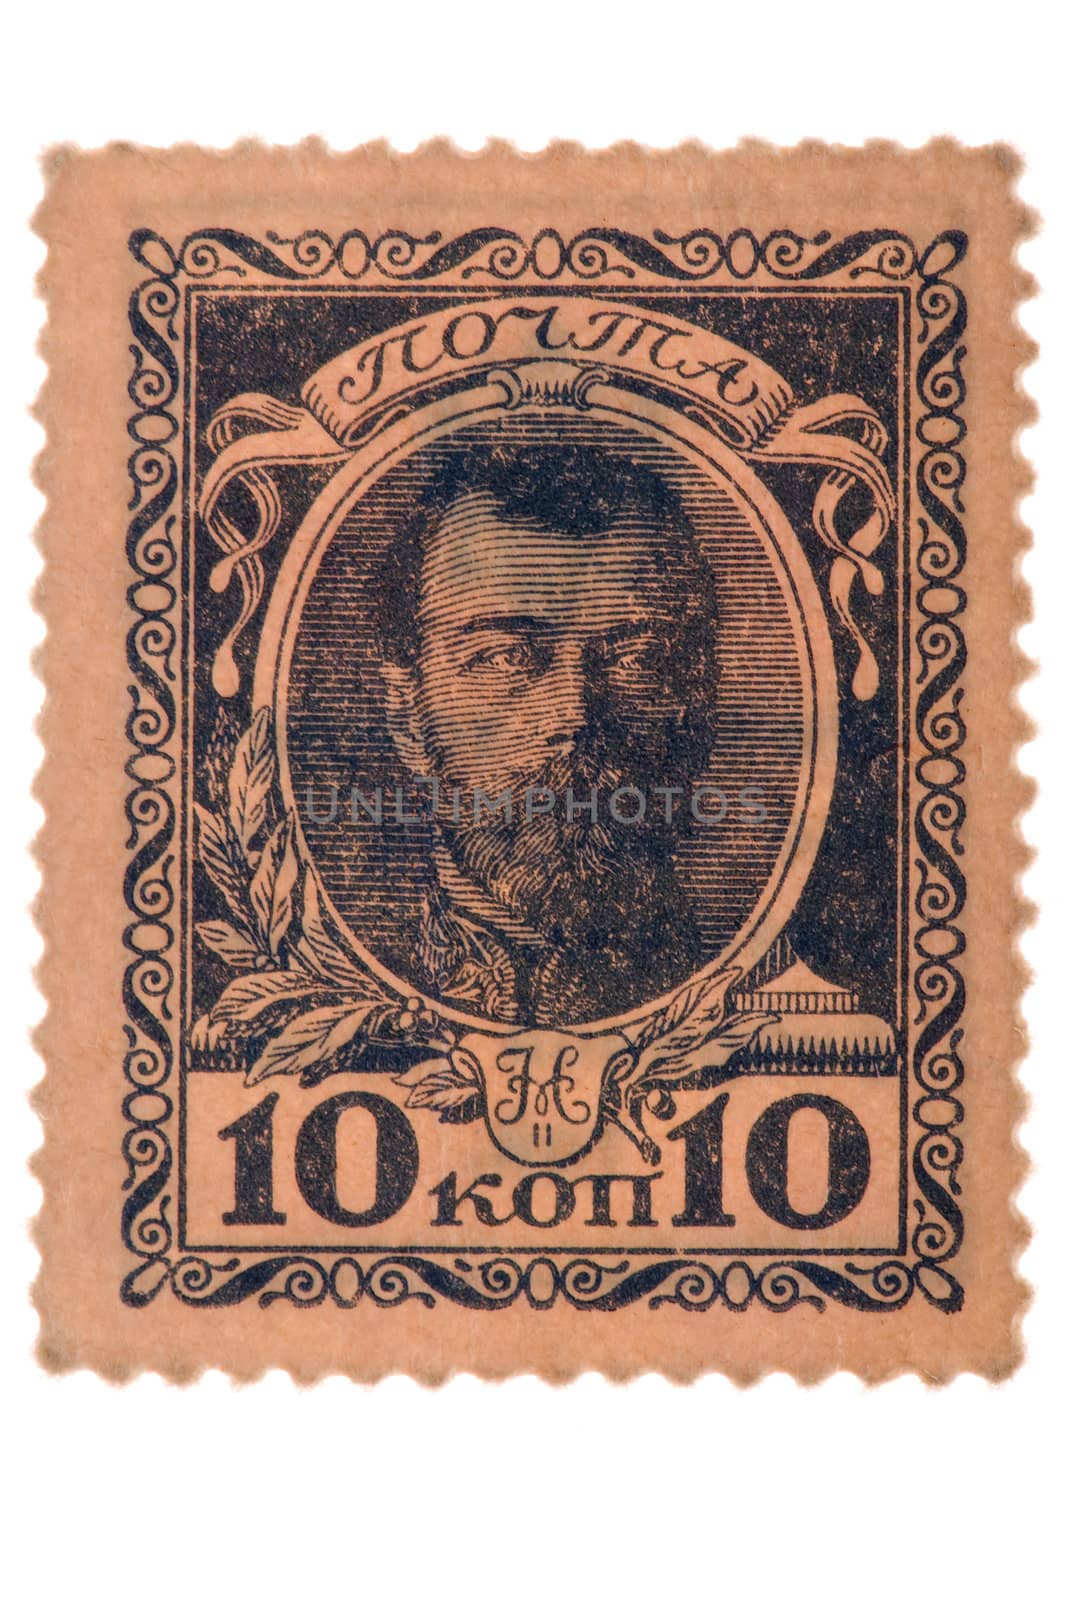 object on white - postage stamp Russian tsar 